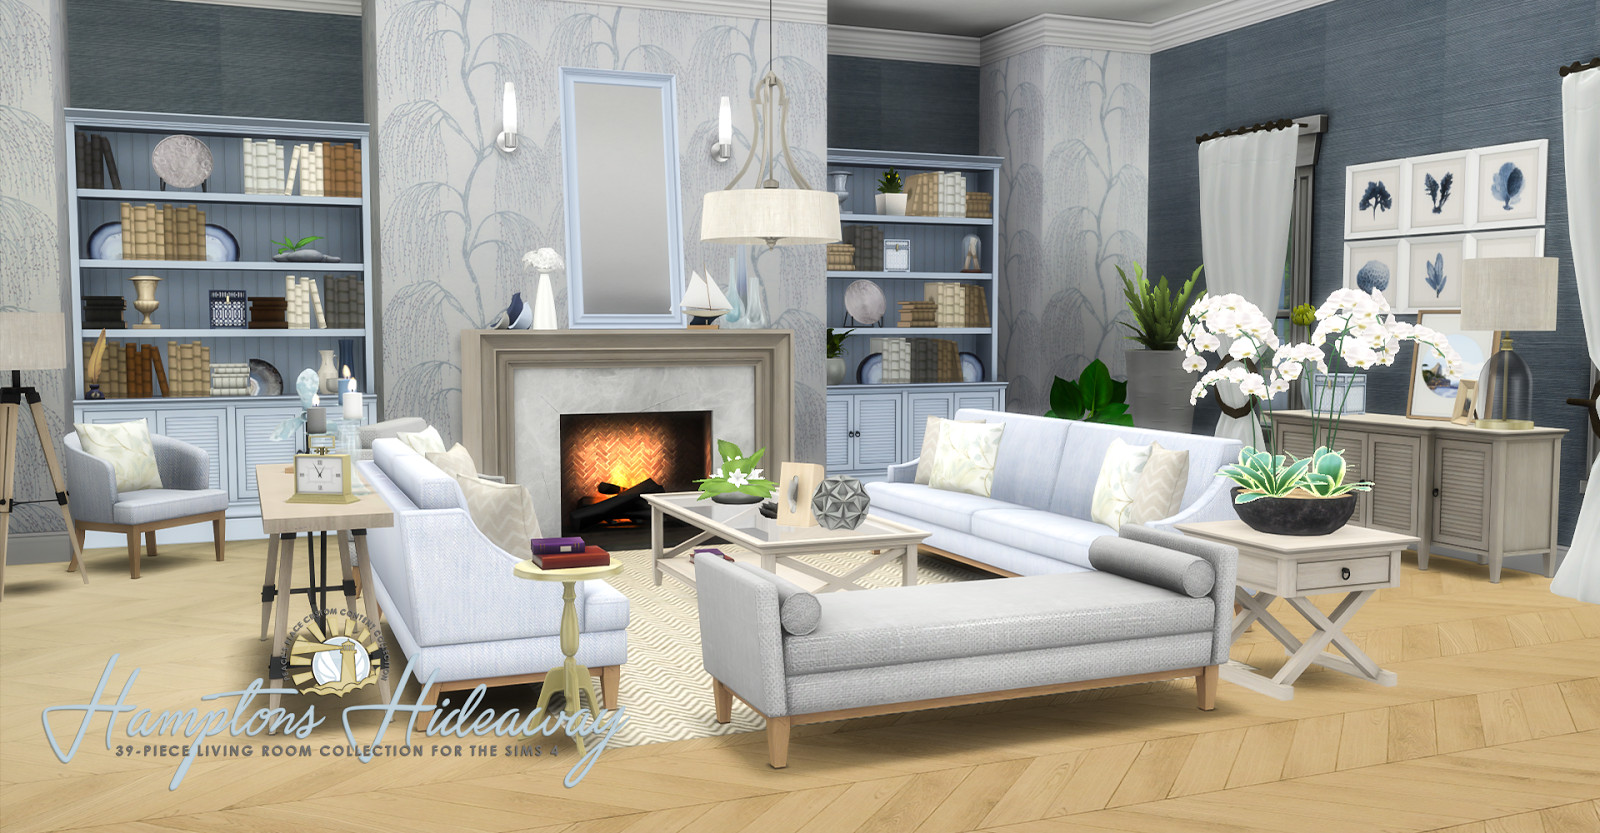 Sims 4 Living Room Ideas
 My Sims 4 Blog Updated Hamptons Hideaway Living Room